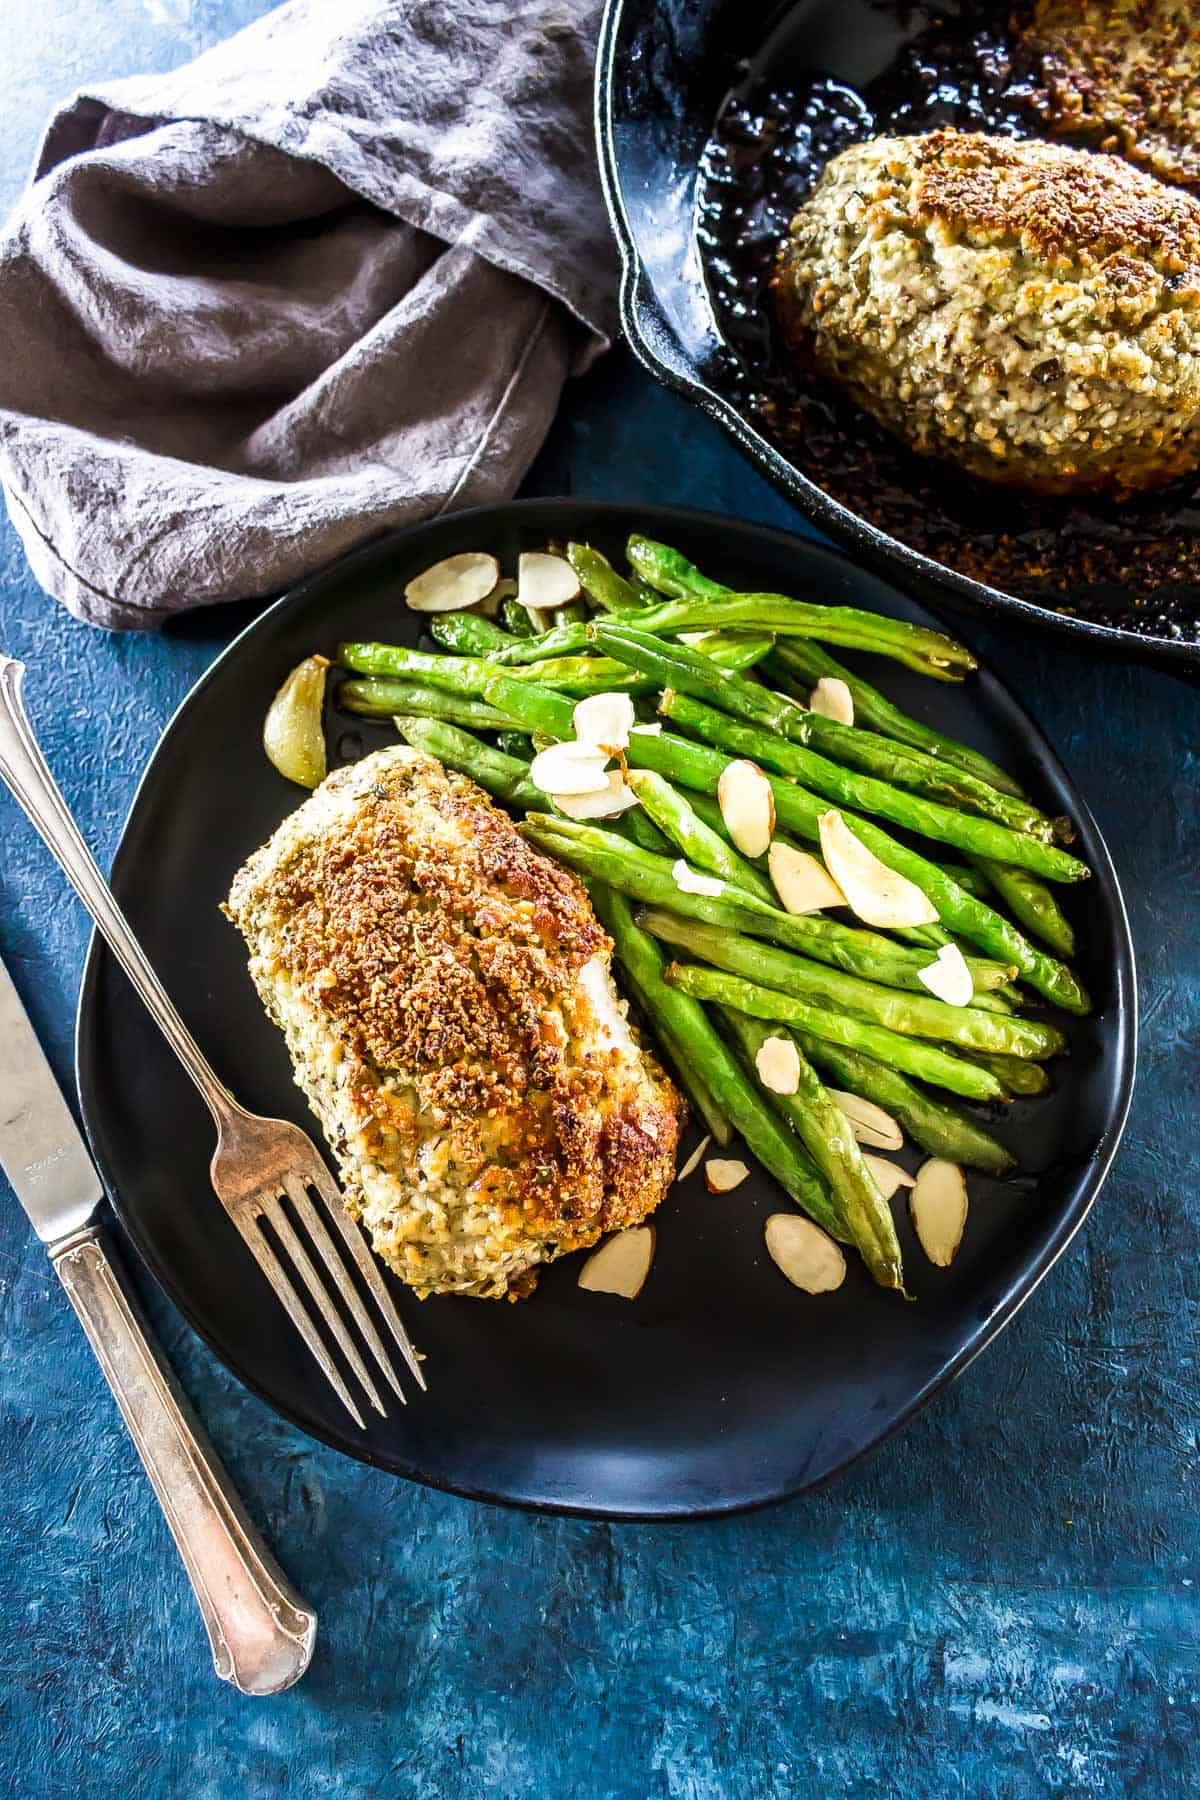 Keto Parmesan Crusted Pork Chops served with green beans almondine.